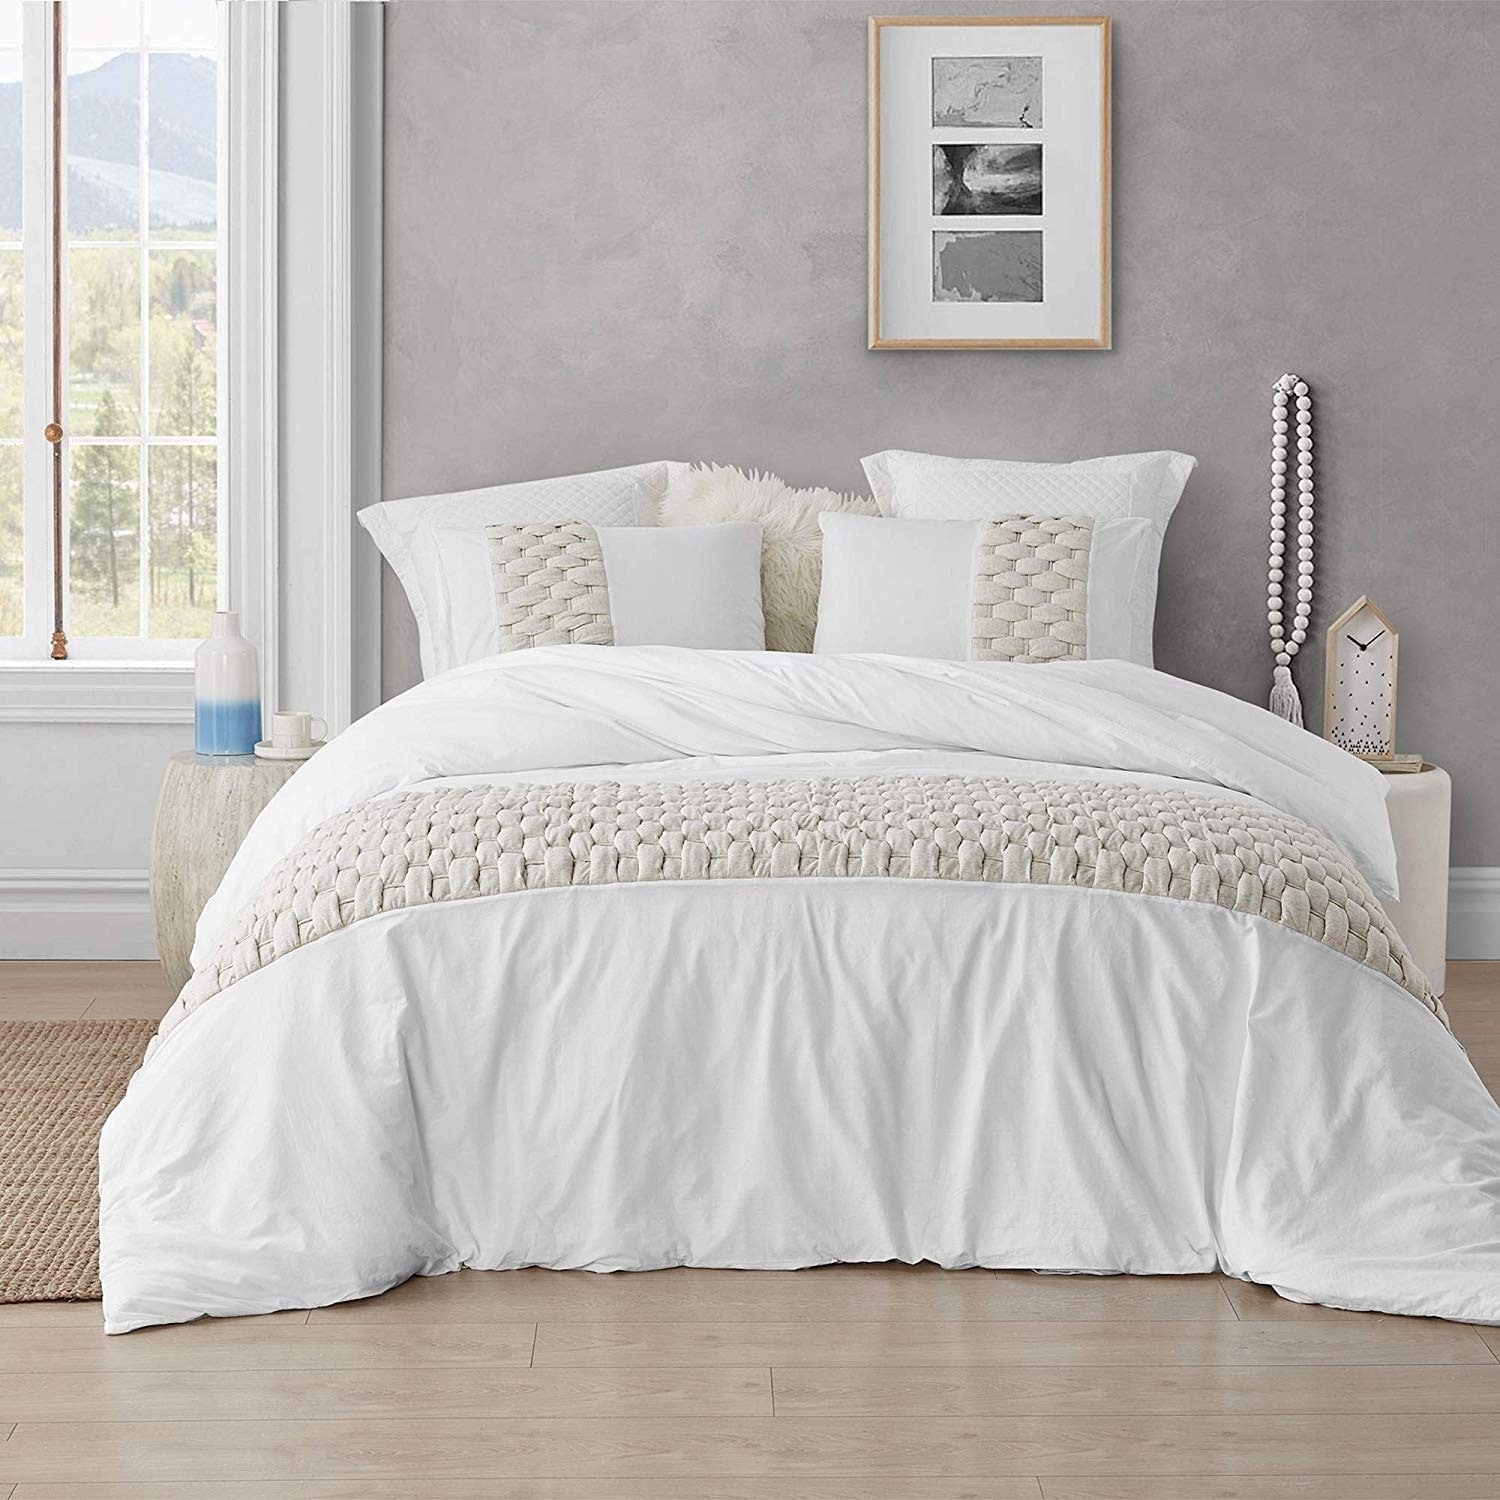 Shop Knit And Loop Textured Oversized Duvet Cover Almond Cream